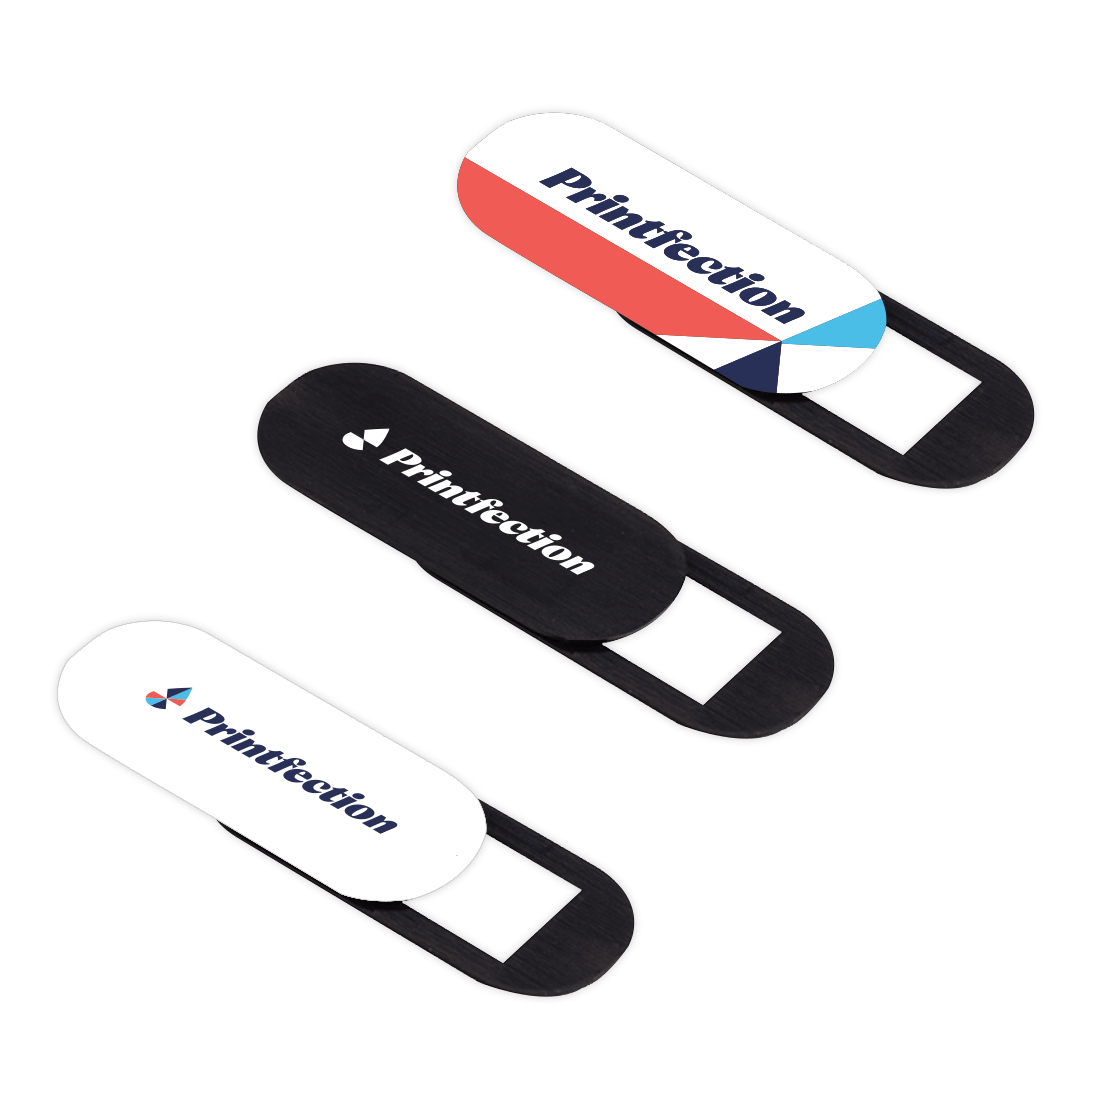 branded webcam covers with company branding on them